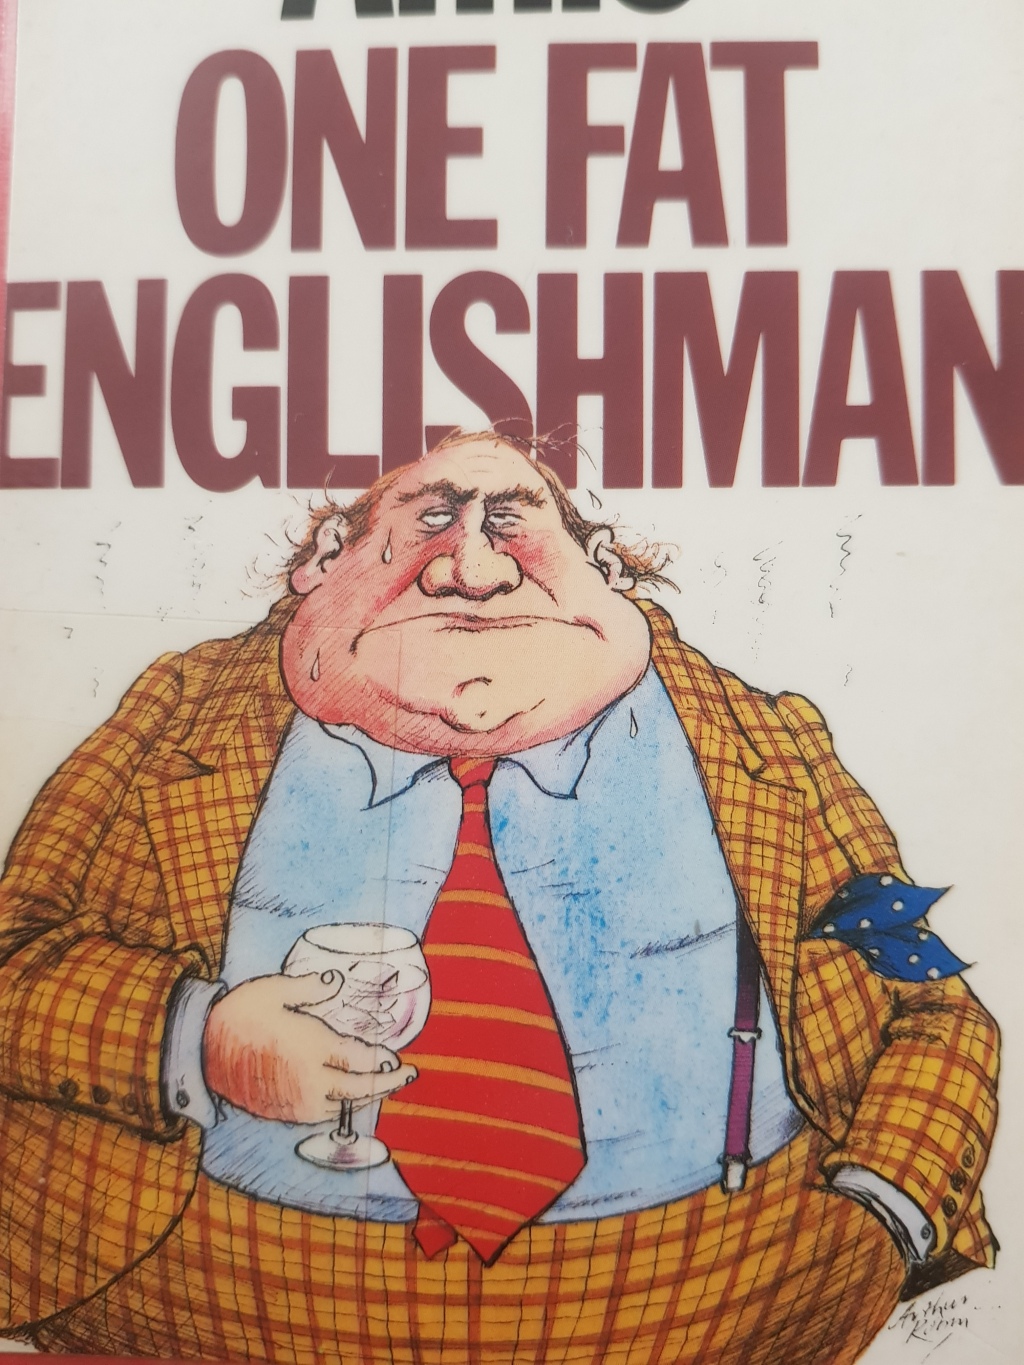 The Prophecy about One Fat Englishman